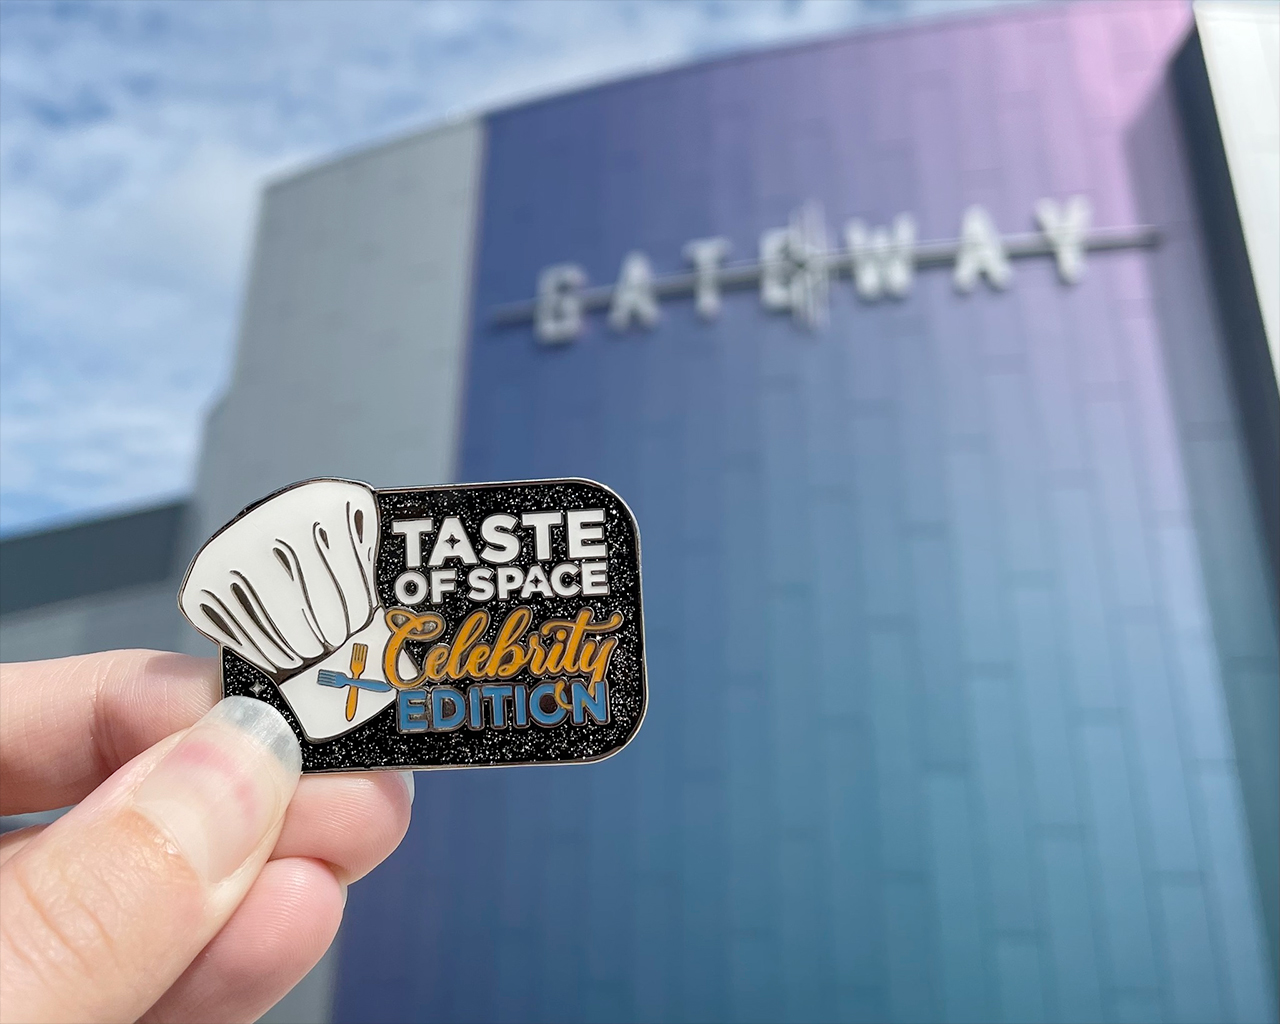 Guests attending the Taste of Space: Celebrity Chef will receive an exclusive pin.